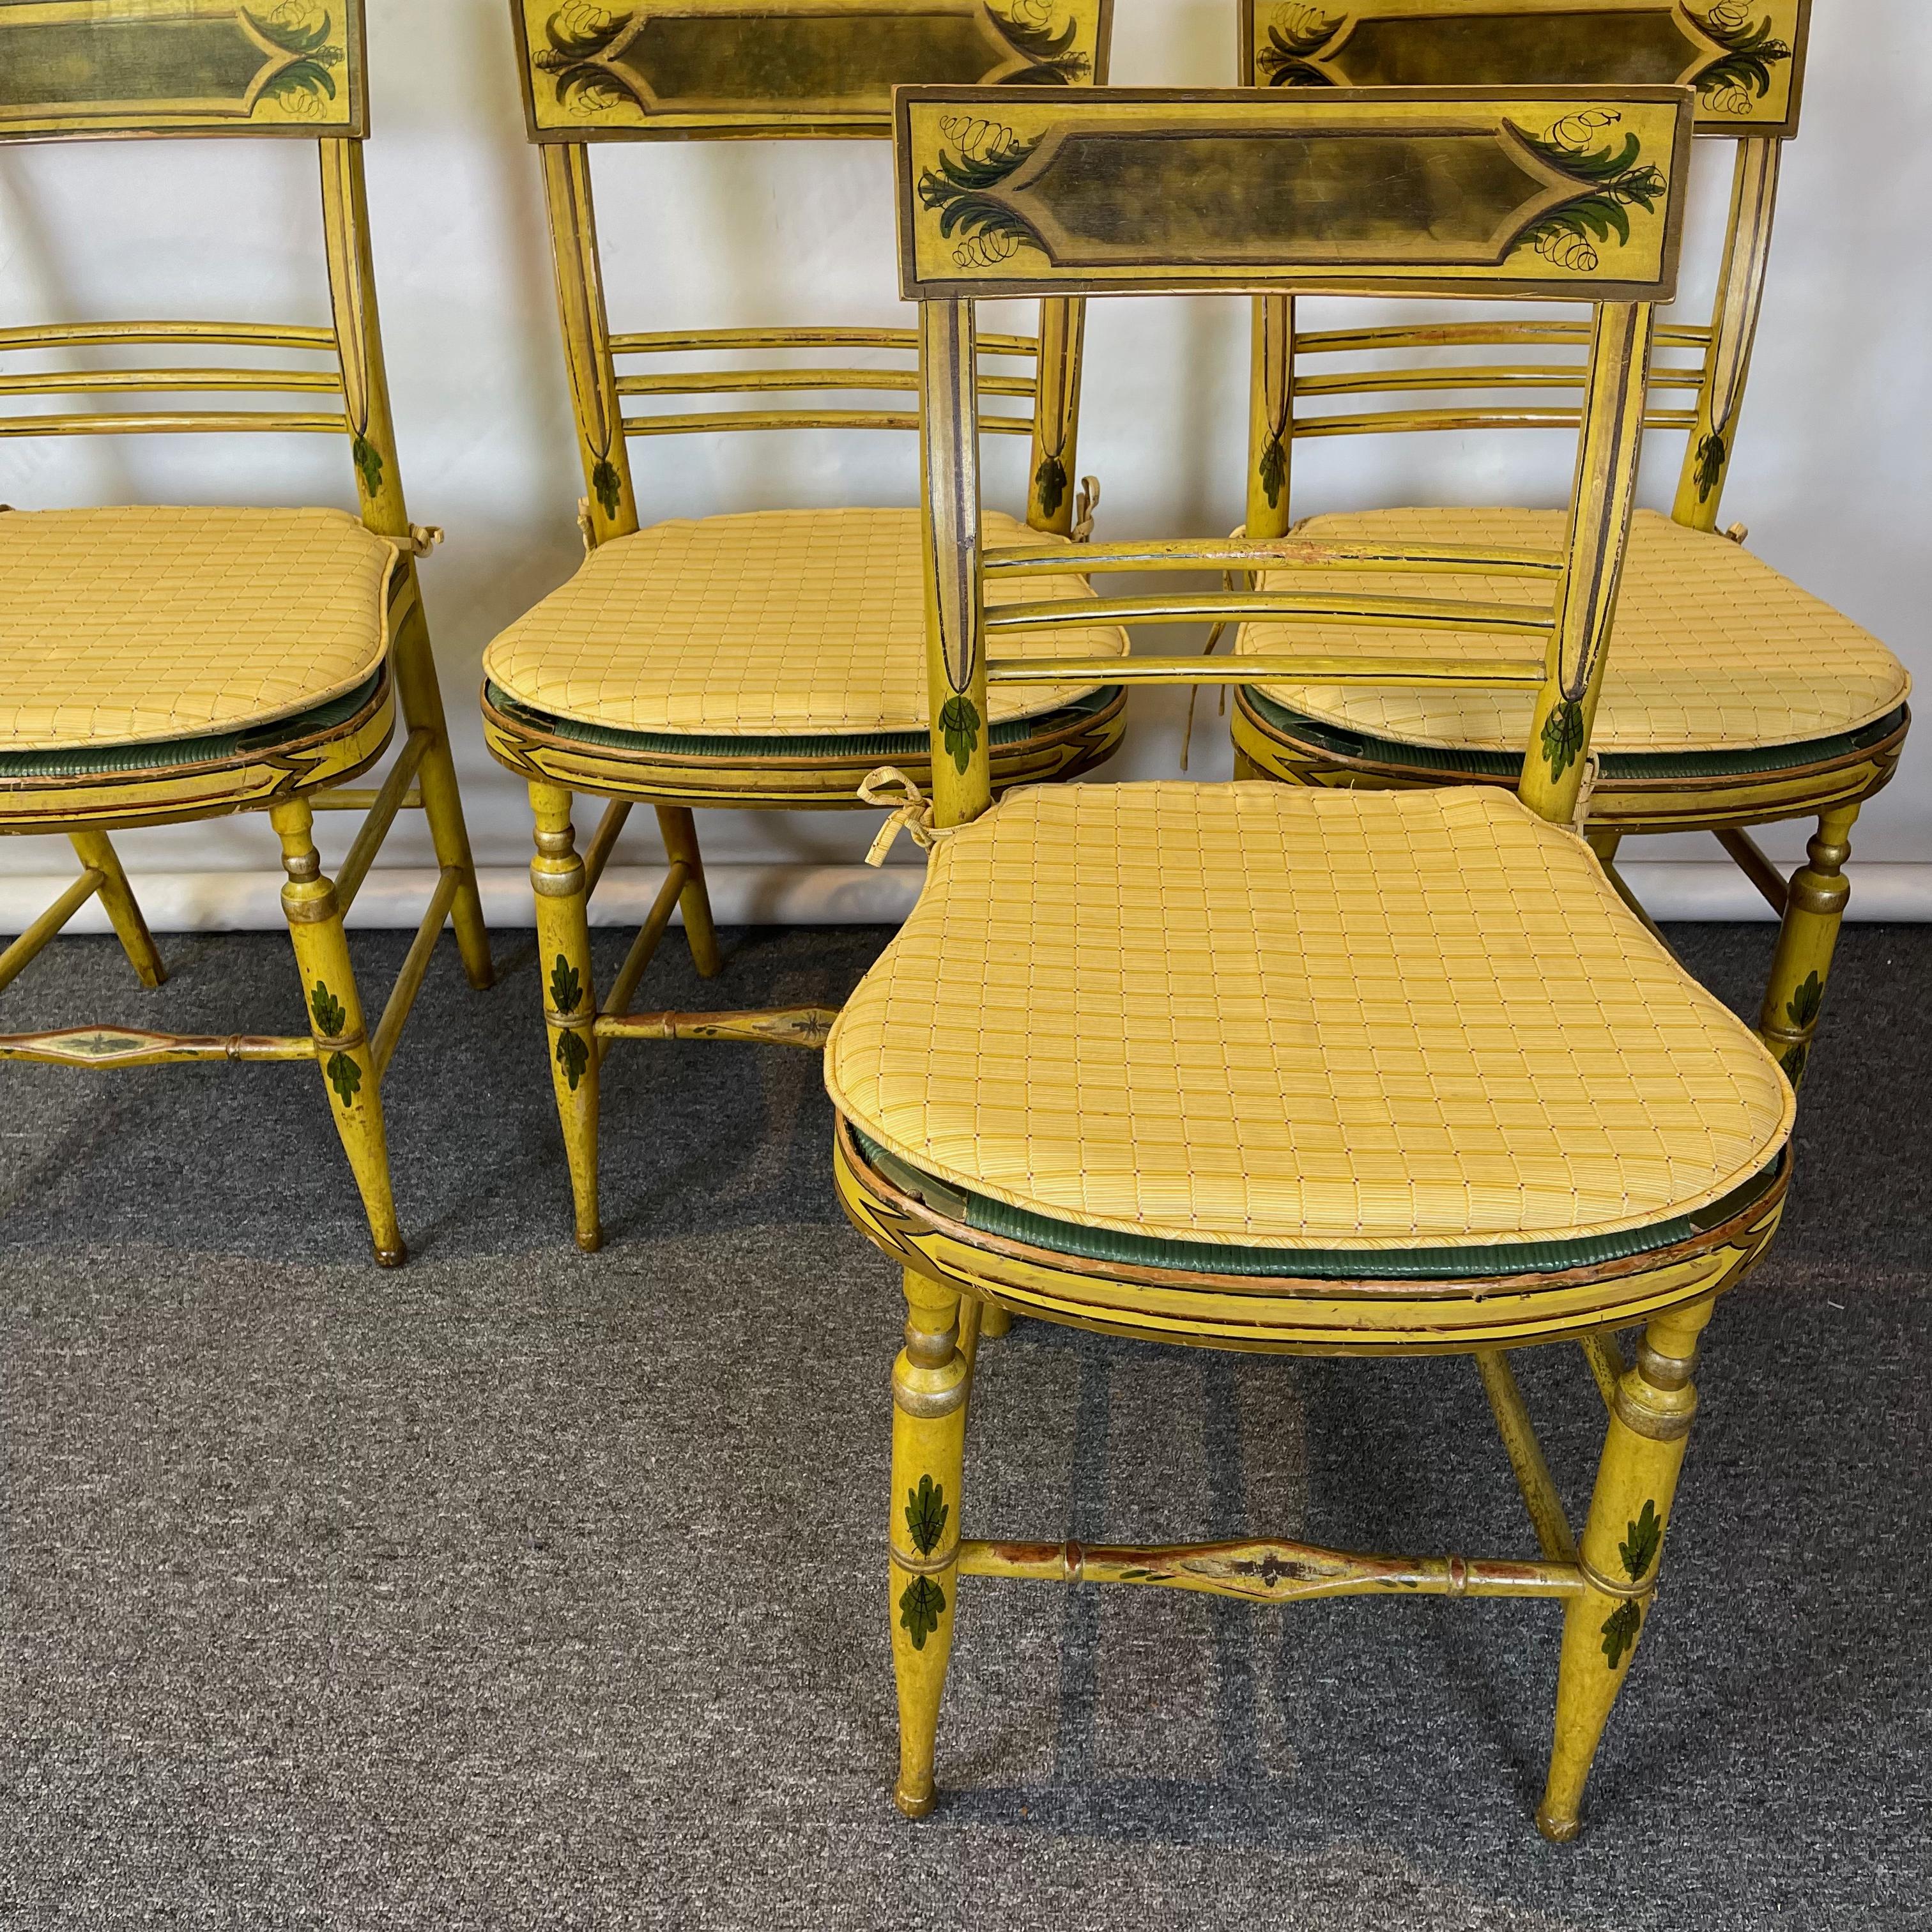 A set of four large and sturdy early 19th C. American fancy chairs in mustard yellow and additional paint decoration with green painted rush seats and loose upholstered cushions most likely made in coastal New Hampshire.